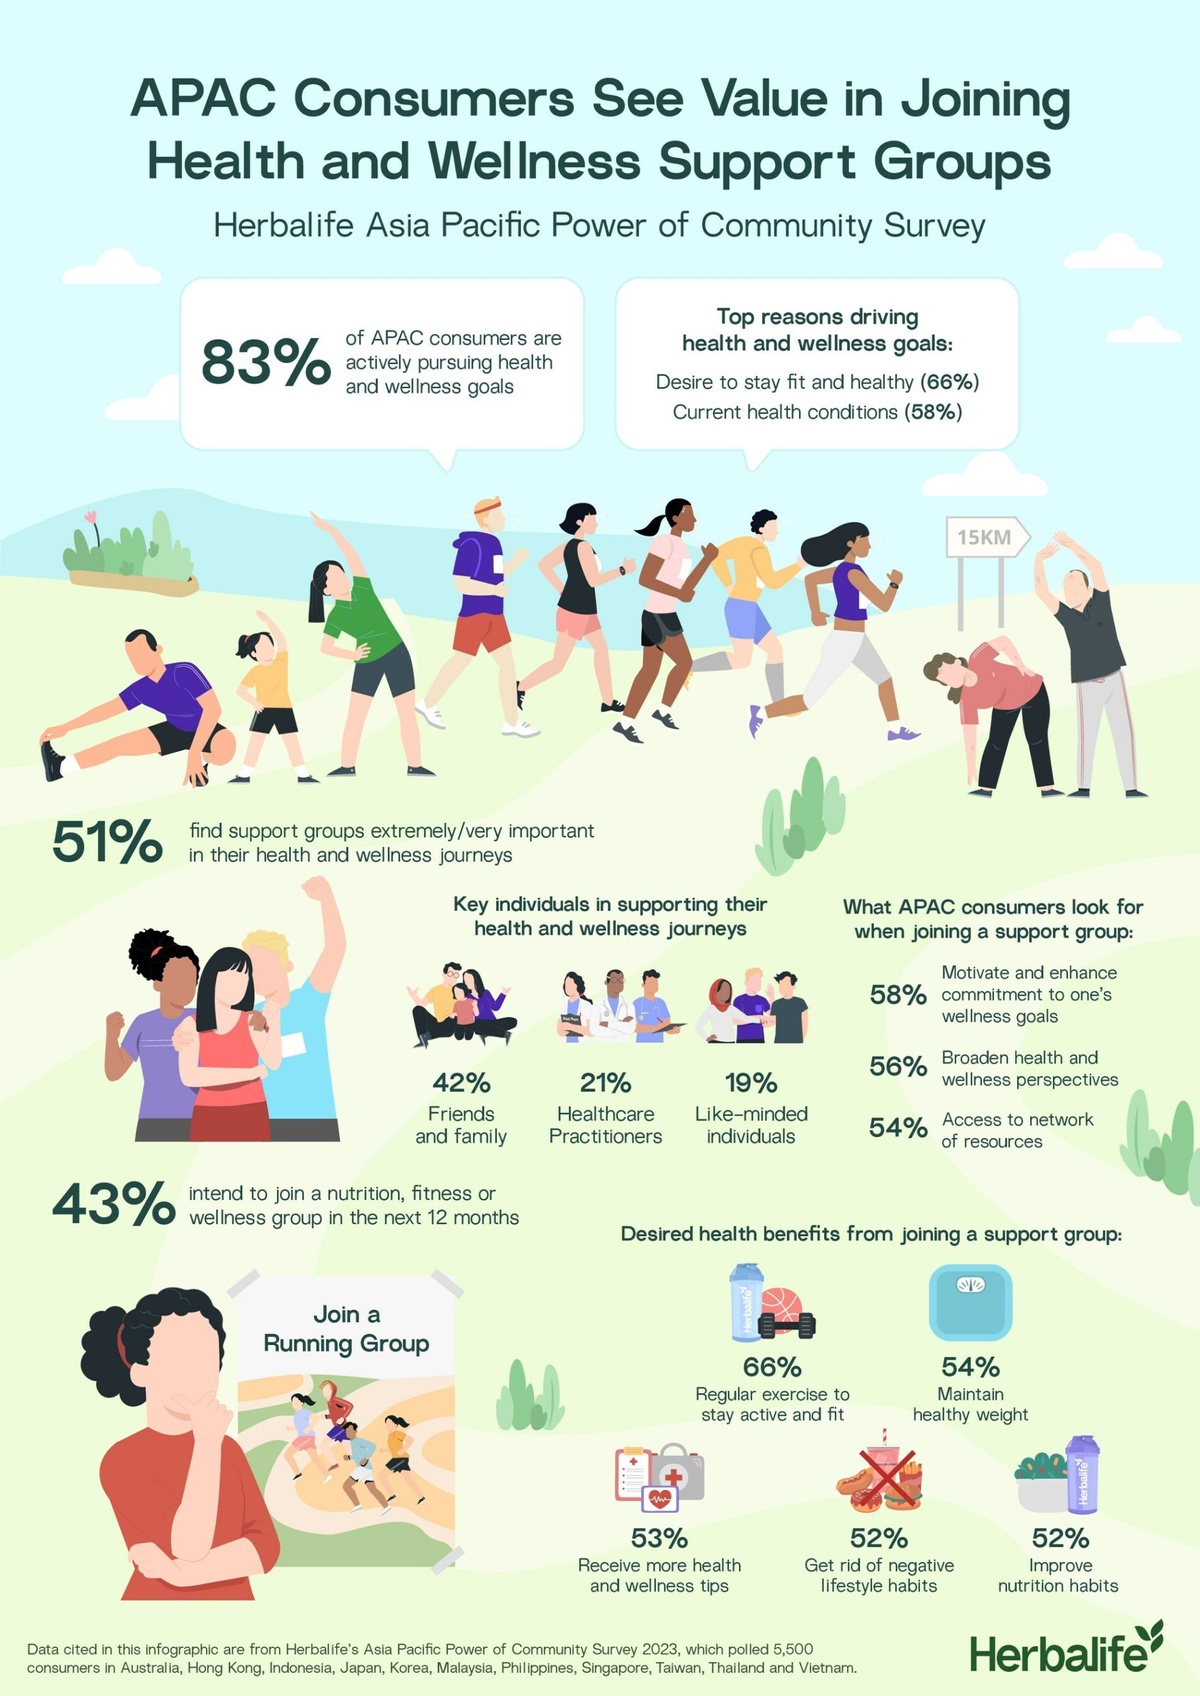 Herbalife Survey Reveals More Than Half of Asia Pacific Consumers Find Support Groups Very Important in Their Health and Wellness